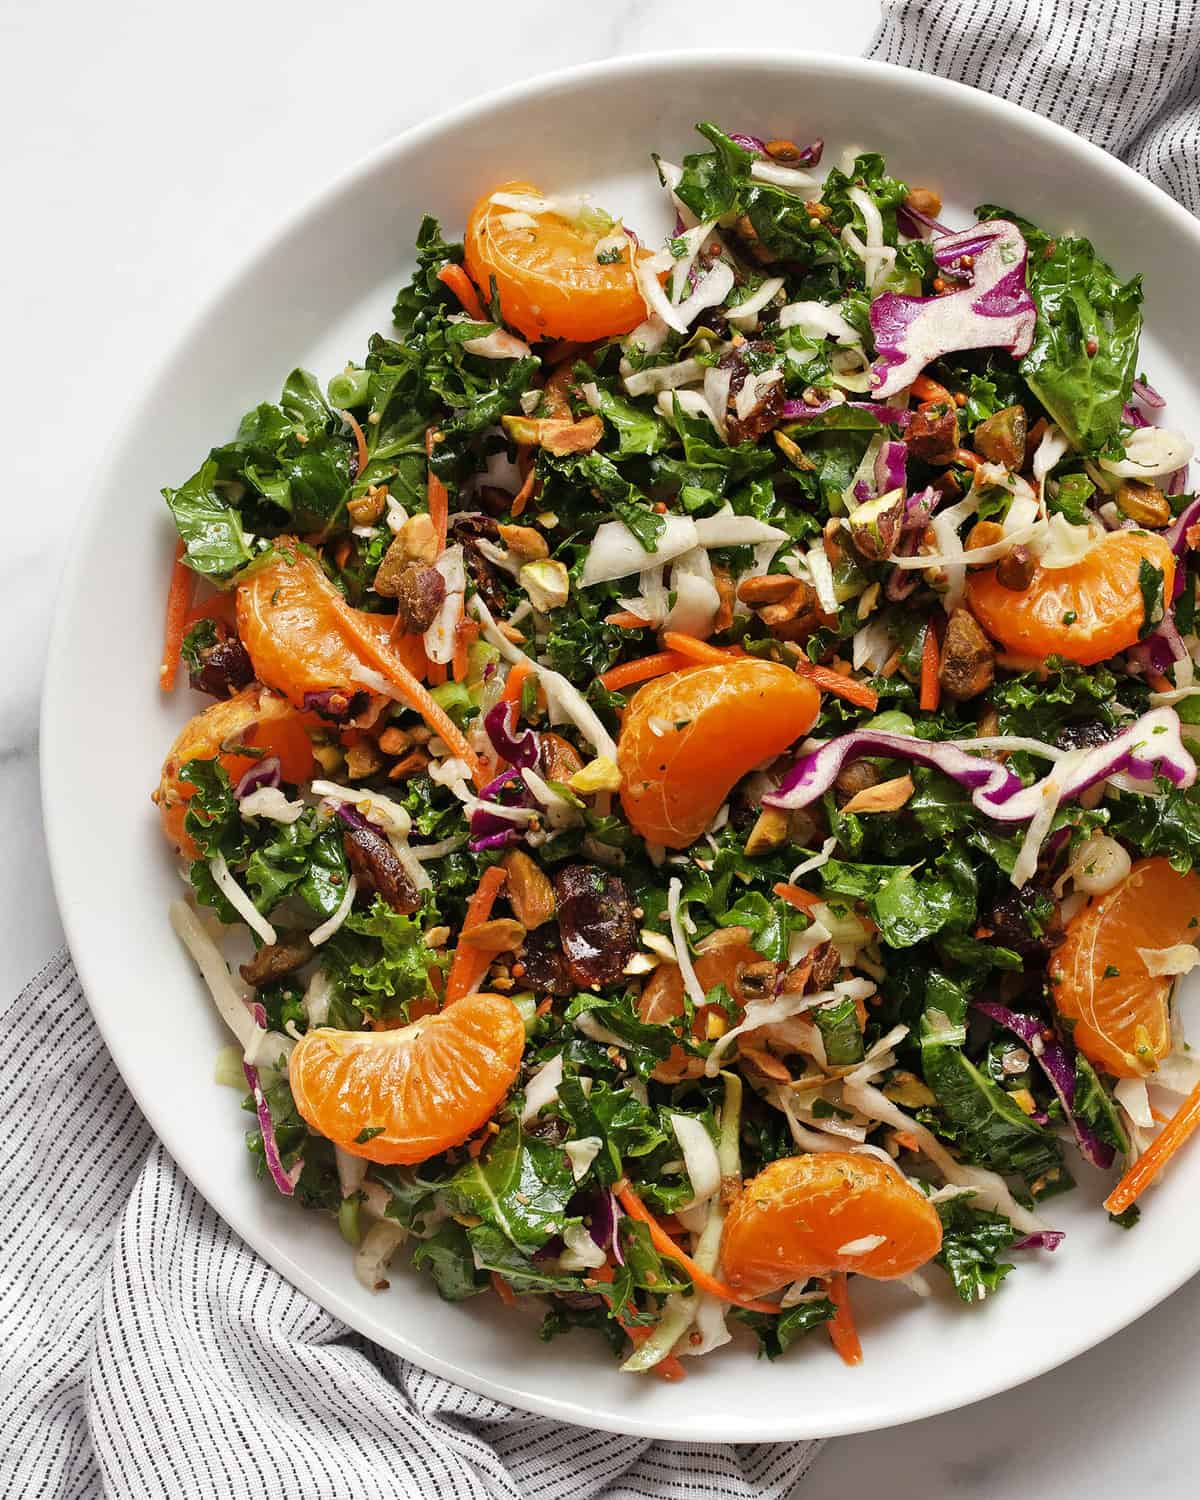 Kale salad with mandarin oranges and kale on a plate.